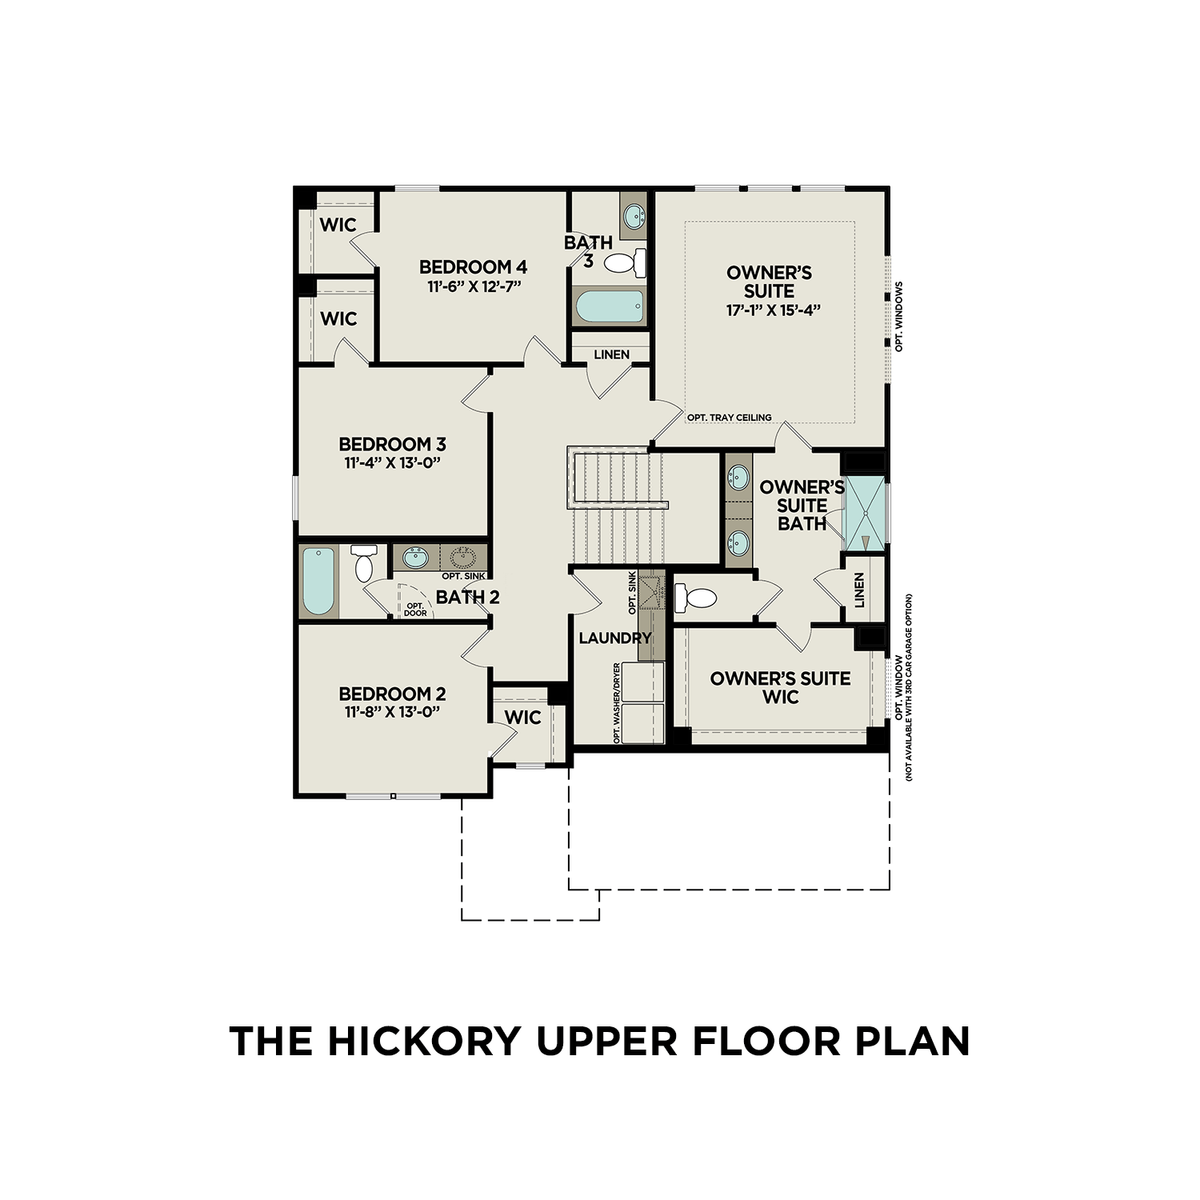 2 - The Hickory C floor plan layout for 491 Black Walnut Drive in Davidson Homes' Carellton community.